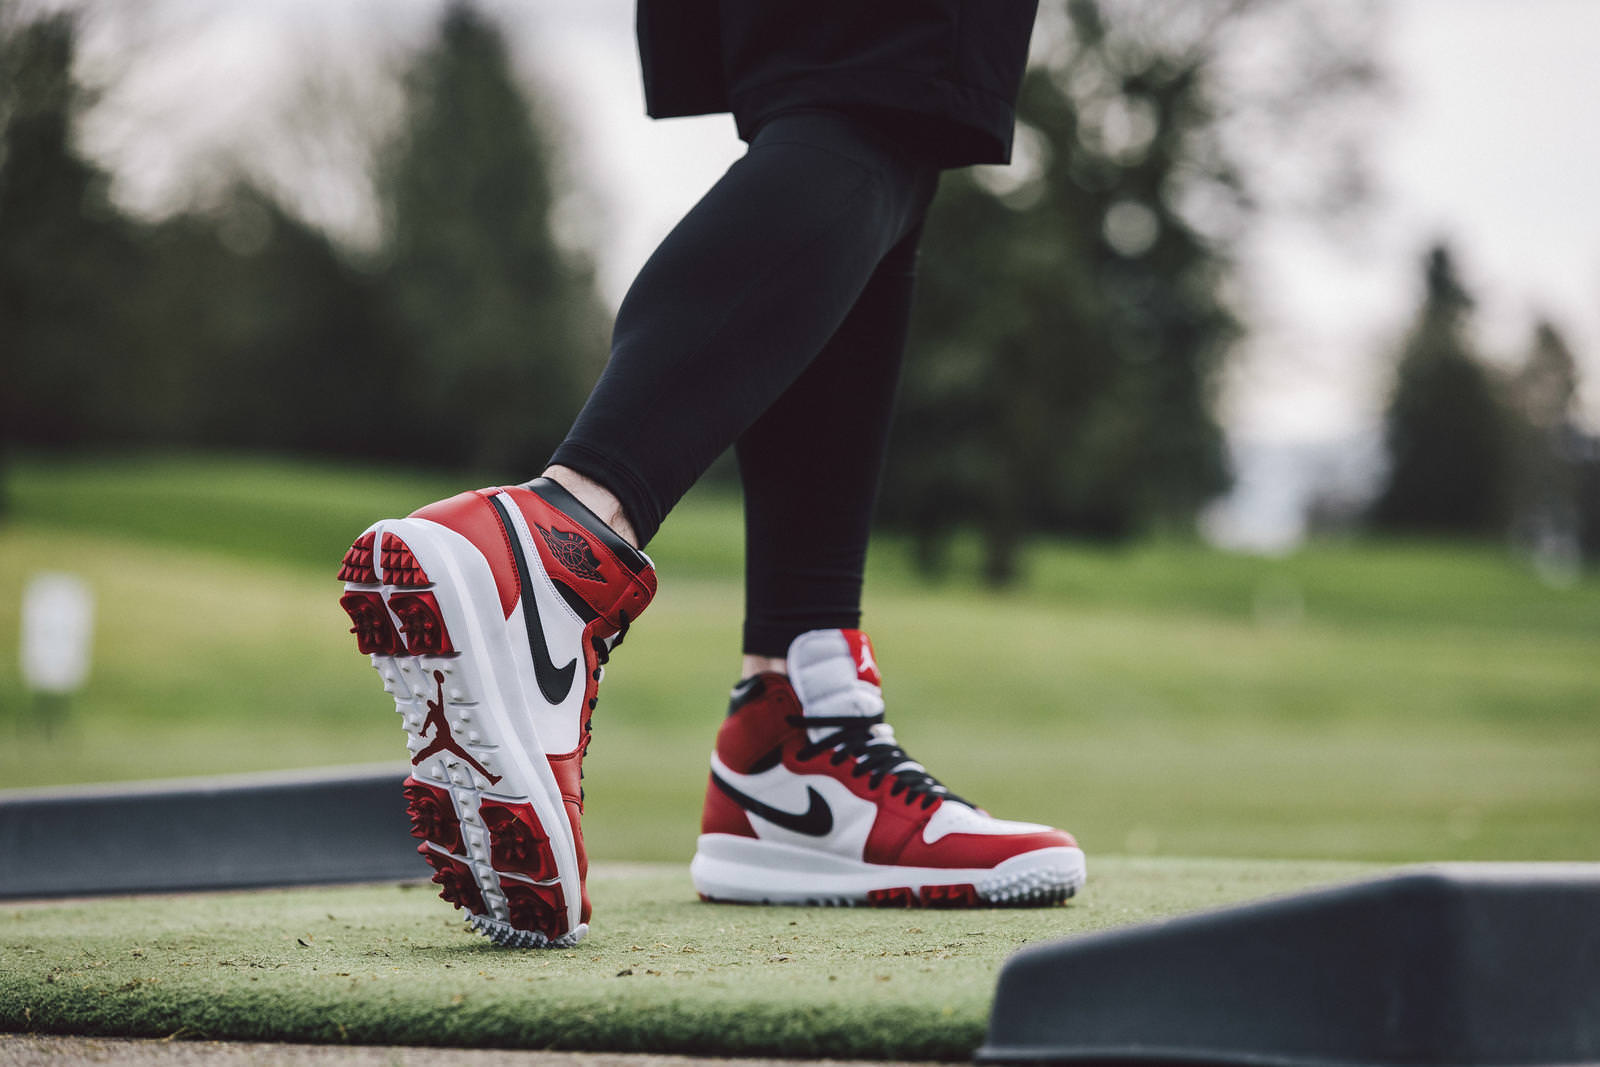 Nike go back to the future with Air Jordan golf shoes National Club Golfer